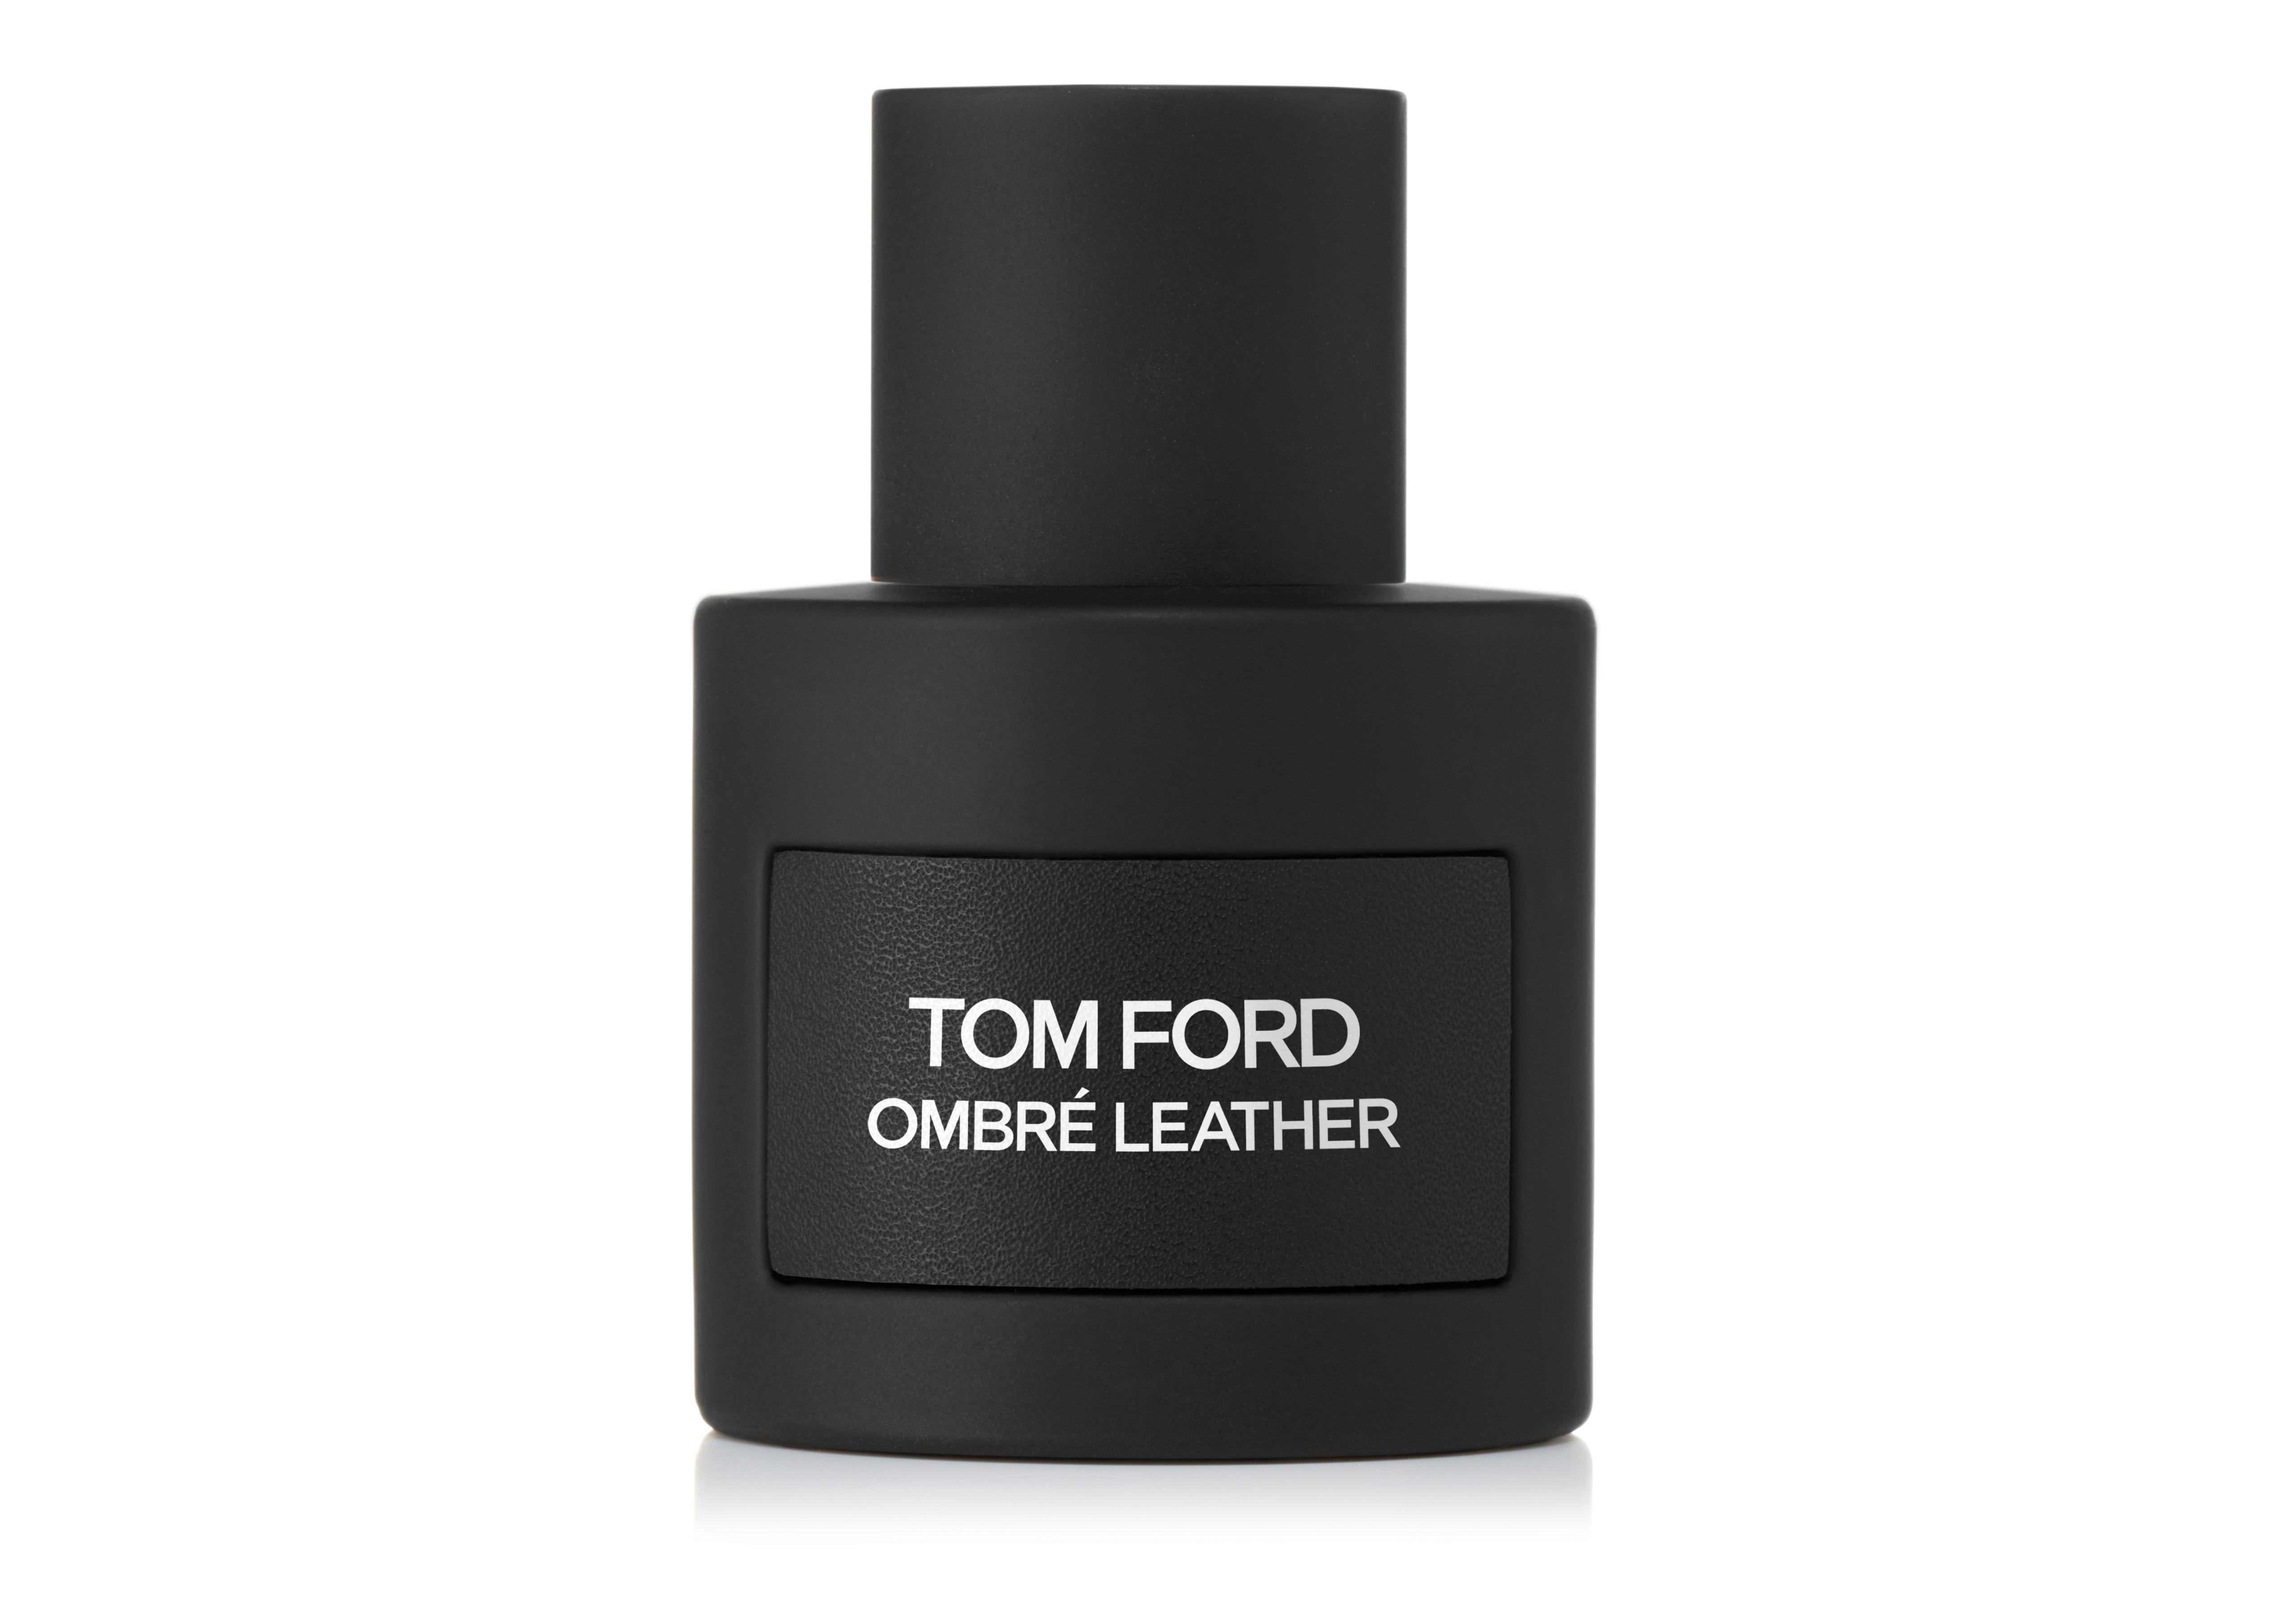 Tom Ford Ombre Leather Parfum EDP 50ml for Men and Women